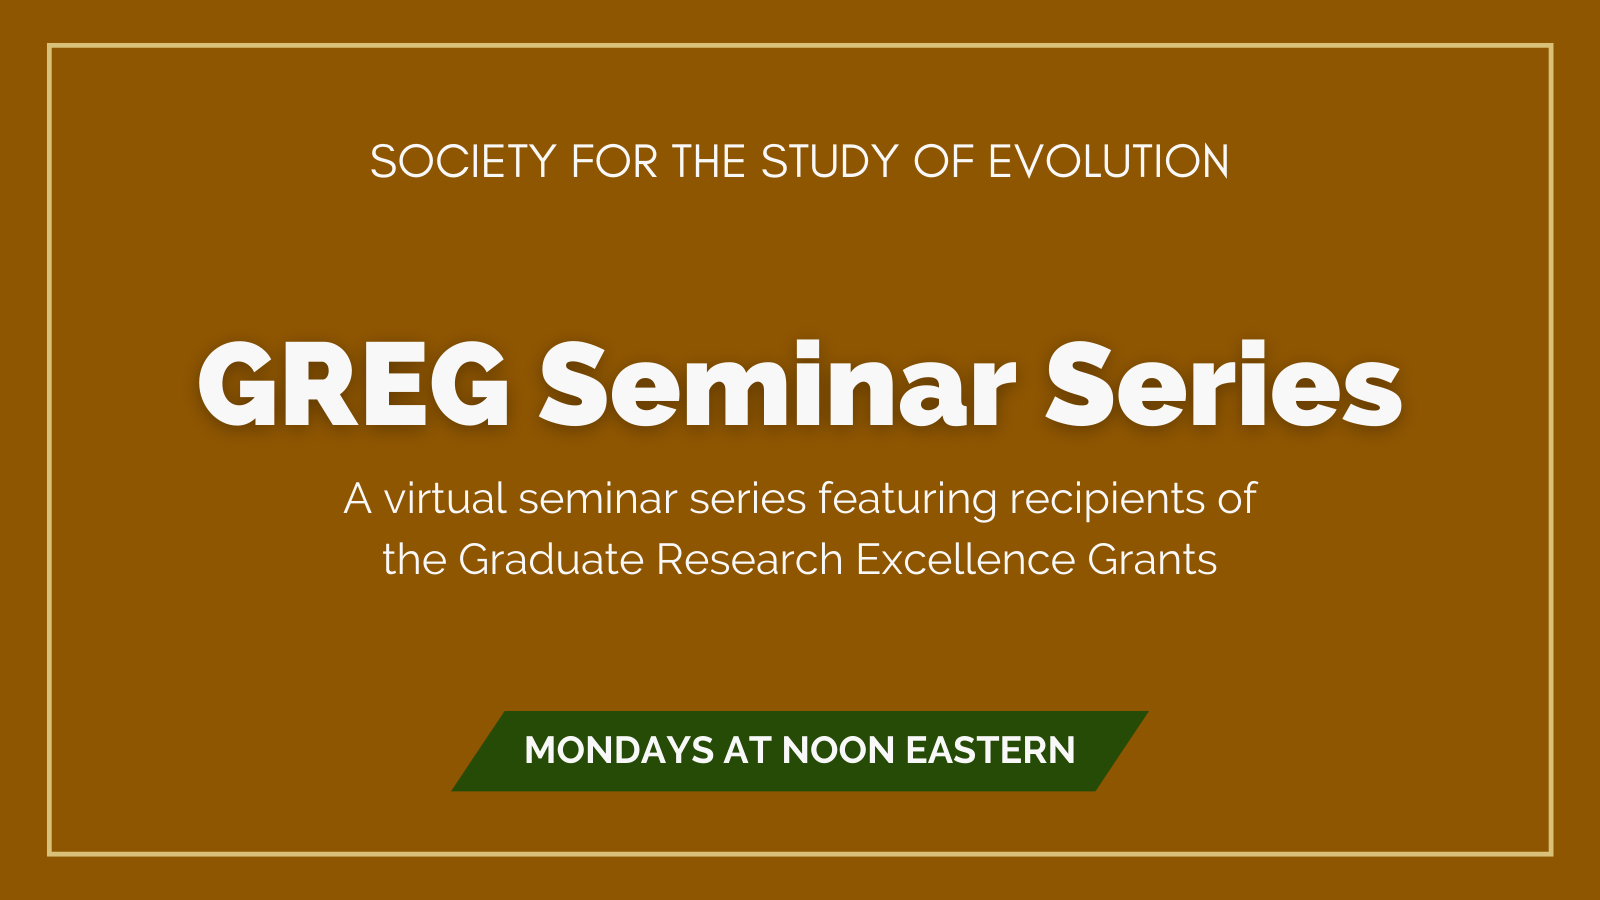 Text: Society for the Study of Evolution GREG Seminar Series. A virtual seminar series featuring recipients of the Graduate Research Excellence Grants, Mondays at noon Eastern.